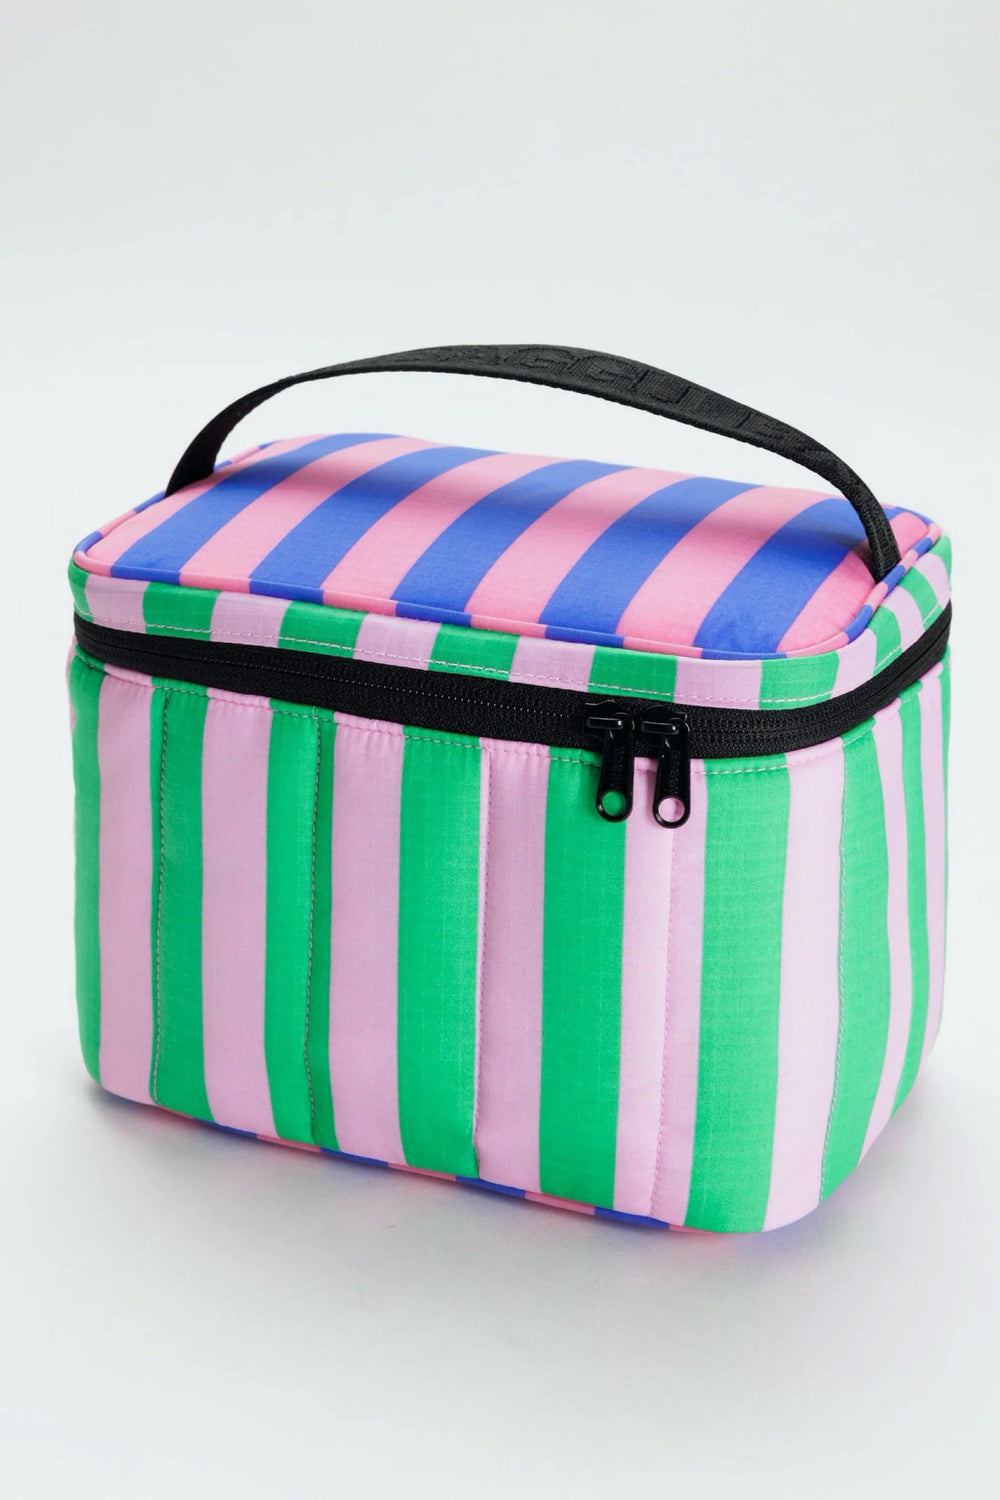 Awning Stripes Mix Puffy Lunch Bag